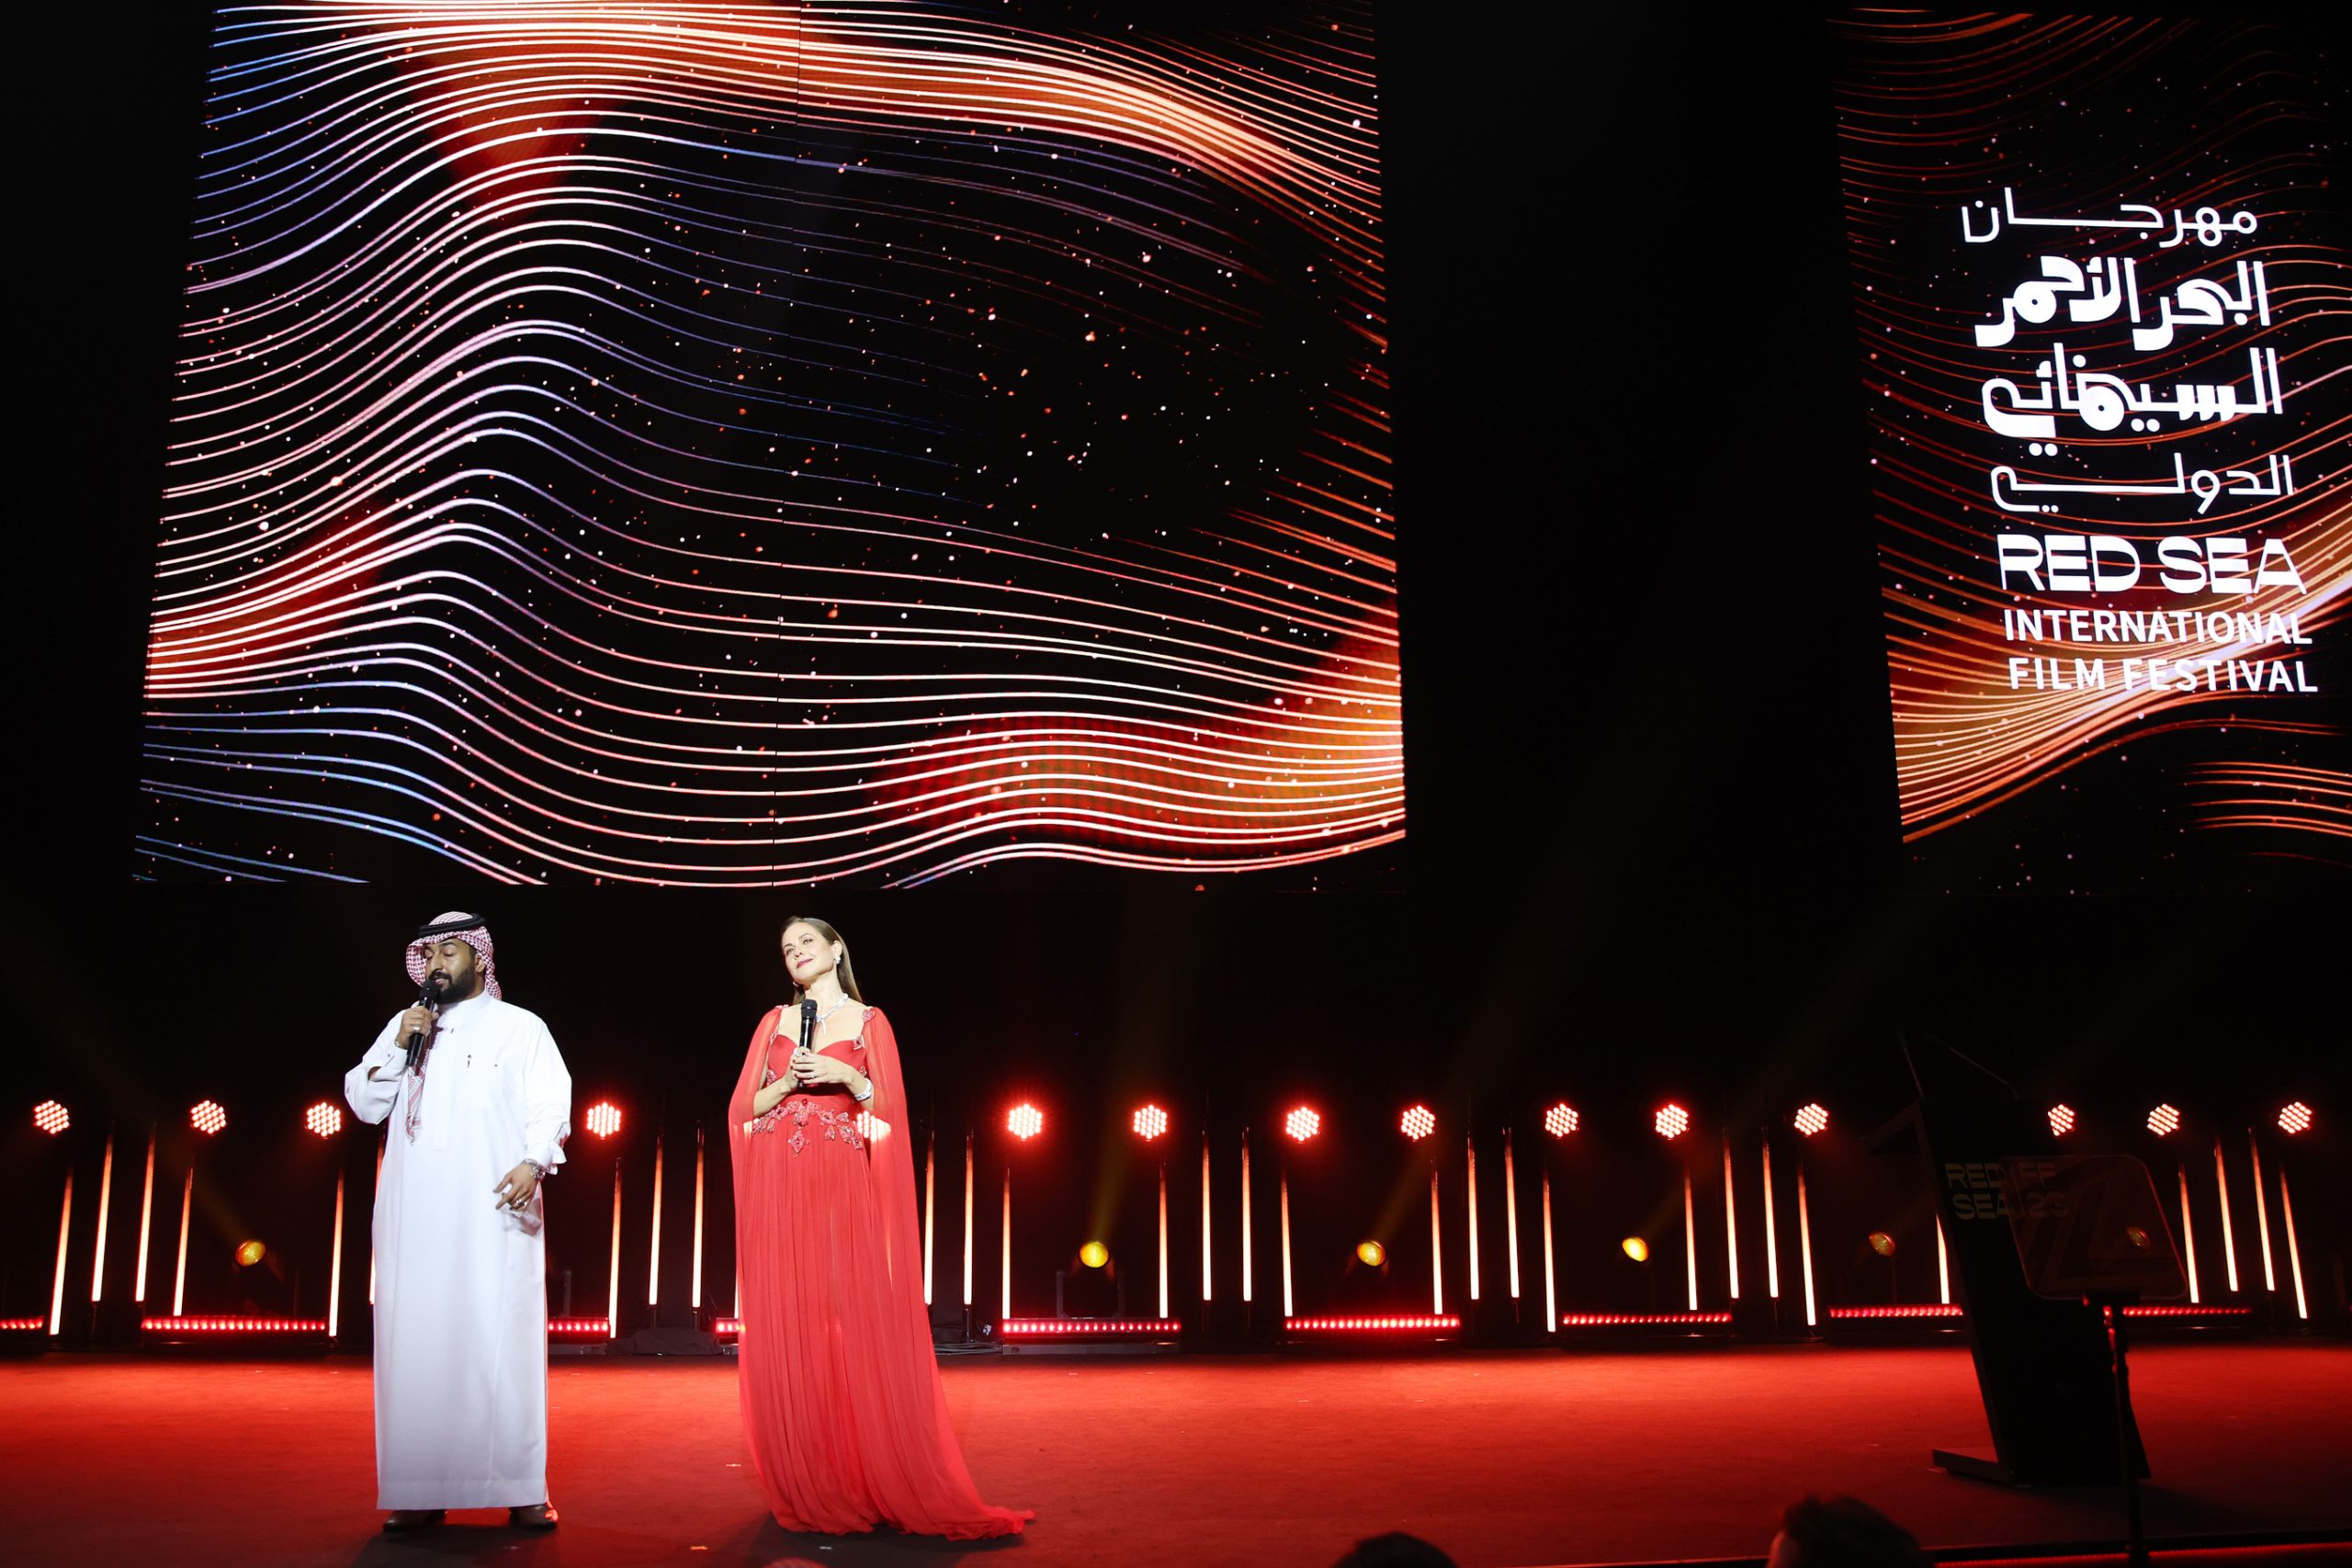 JEDDAH, SAUDI ARABIA - DECEMBER 07: Mohammed Al Dokhei and Raya Abirached speak on stage during the Closing Ceremony at the Red Sea International Film Festival 2023 on December 07, 2023 in Jeddah, Saudi Arabia. (Photo by Daniele Venturelli/Getty Images for The Red Sea International Film Festival)